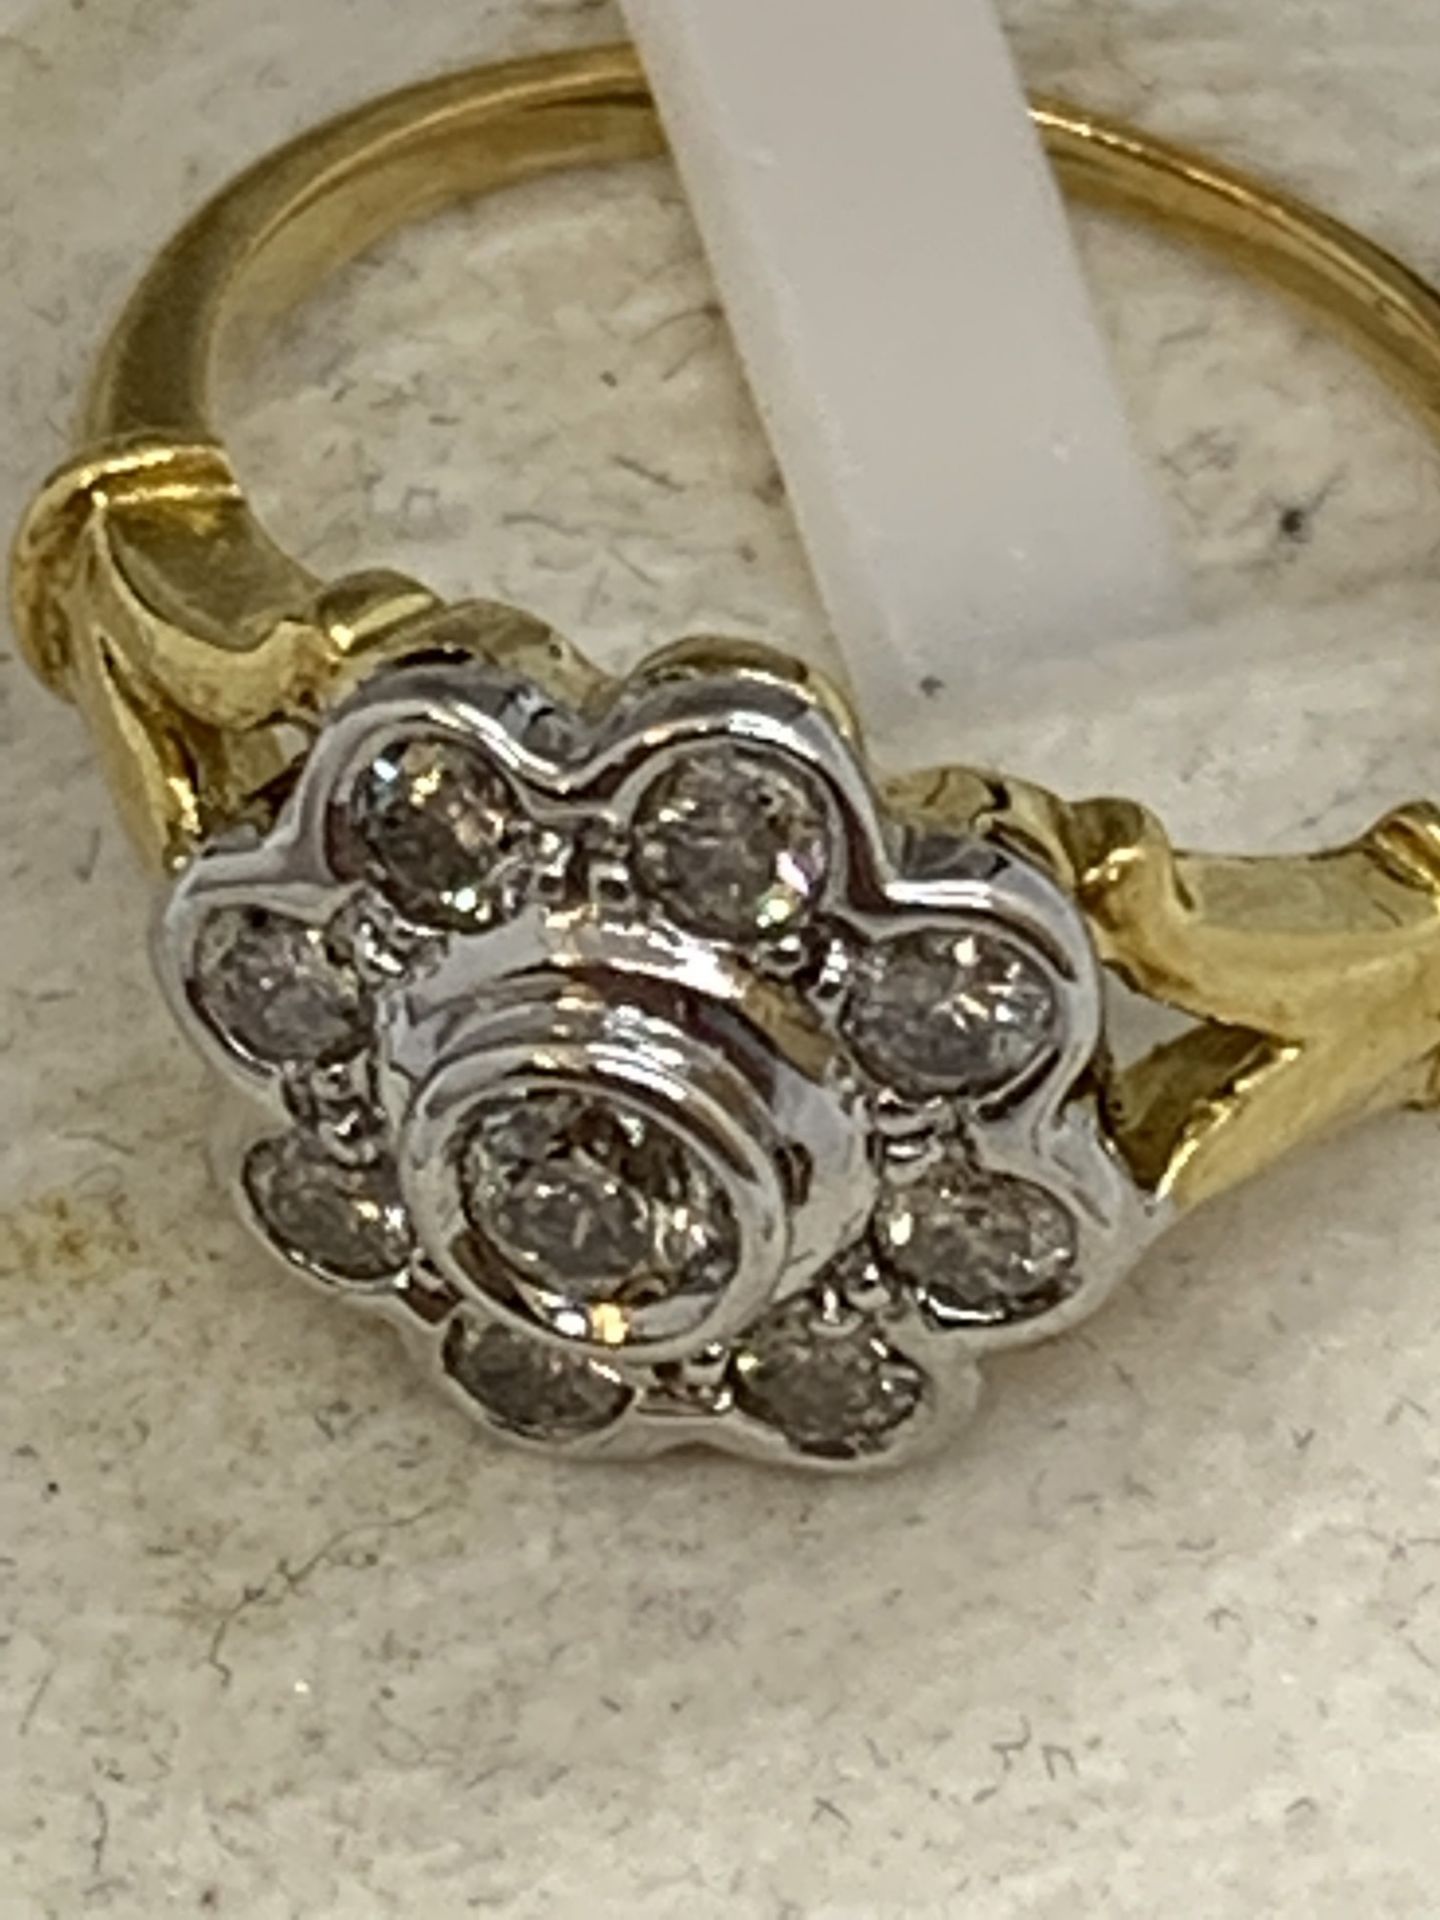 DIAMOND DAISY RING IN 18ct GOLD - 4.1g APPROX - SIZE J APPROX - Image 5 of 5